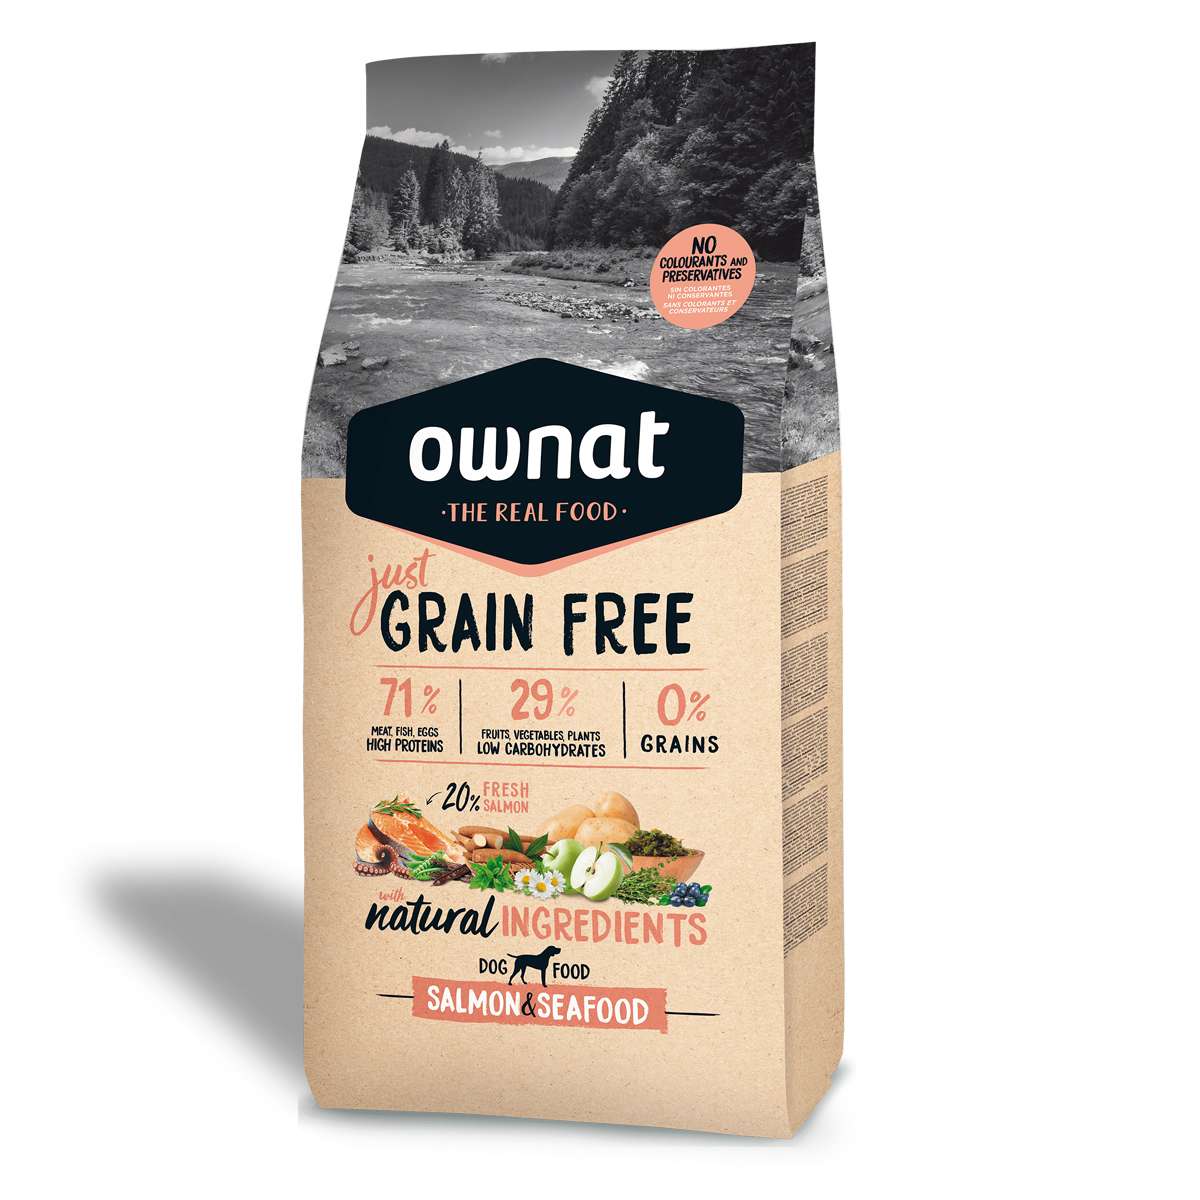 ownat grain free salmon and seafood